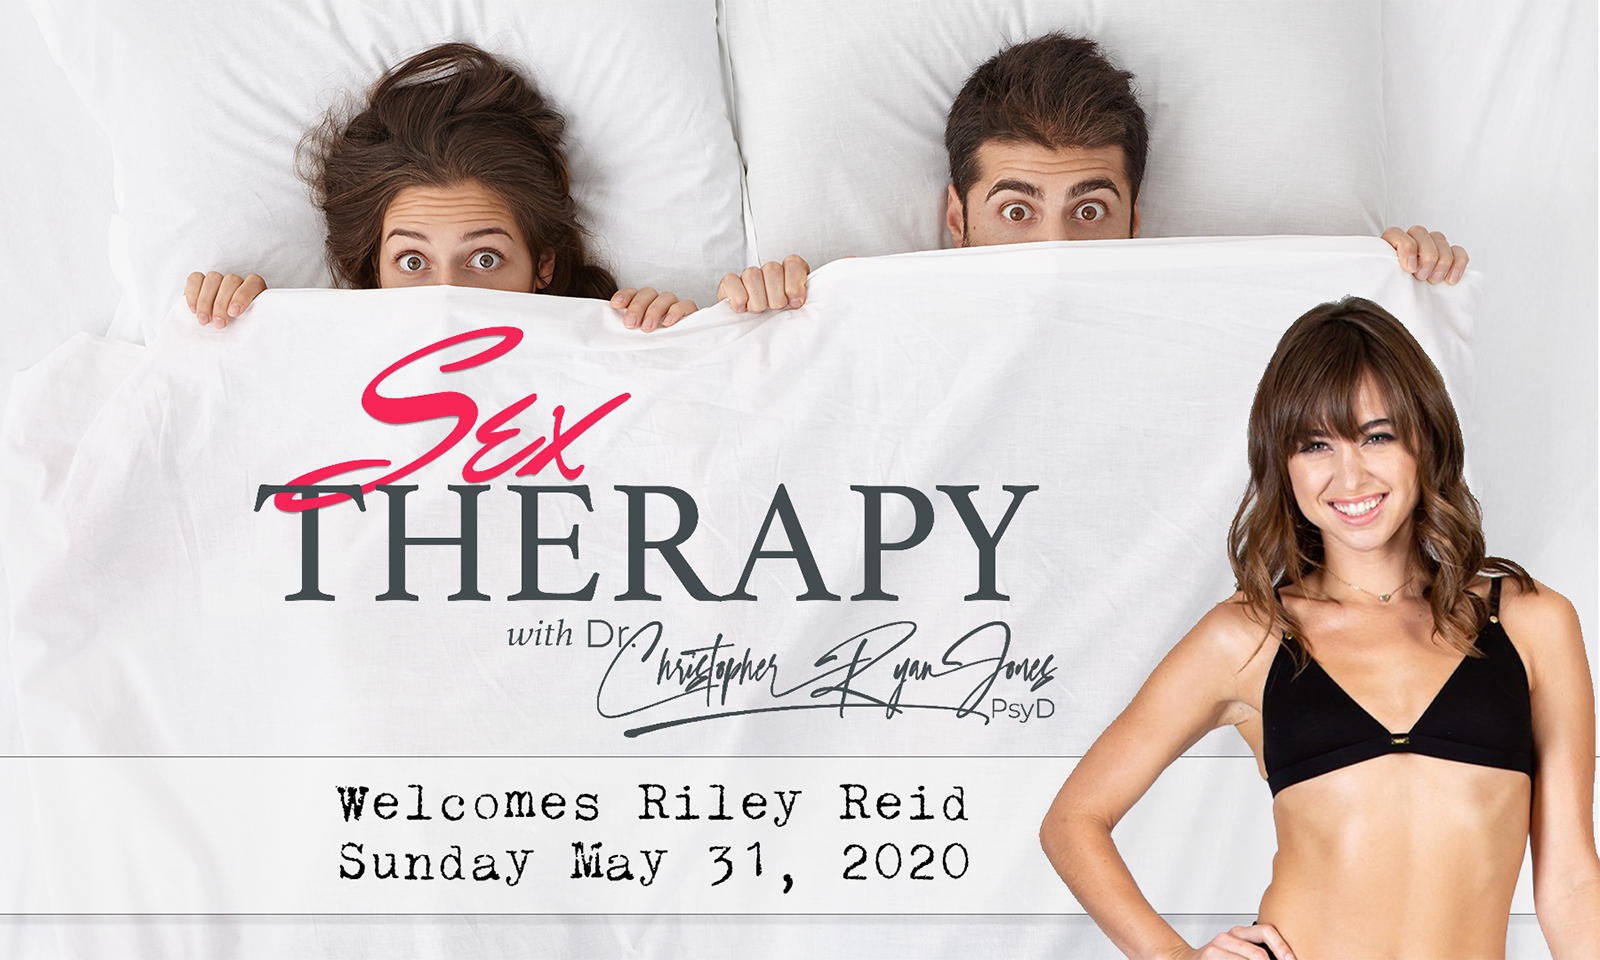 Riley Reid Is Dr. Jones' Special Guest On Sex Therapy Podcast